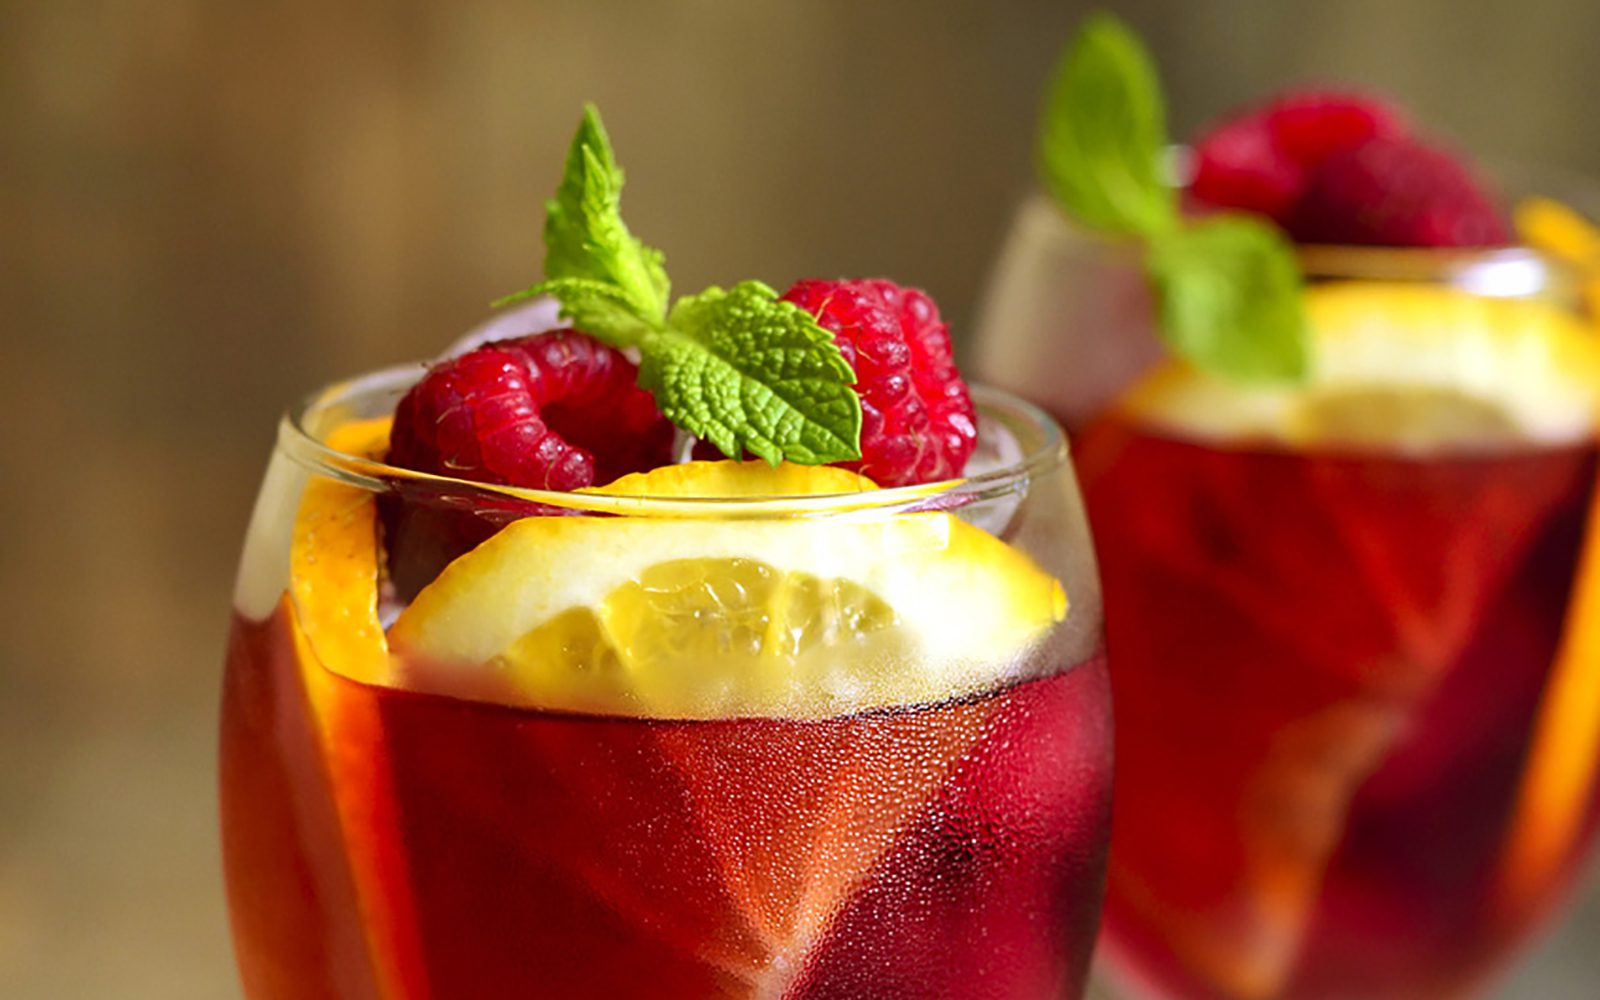 Drink garnished with mint, rasberries and lemon